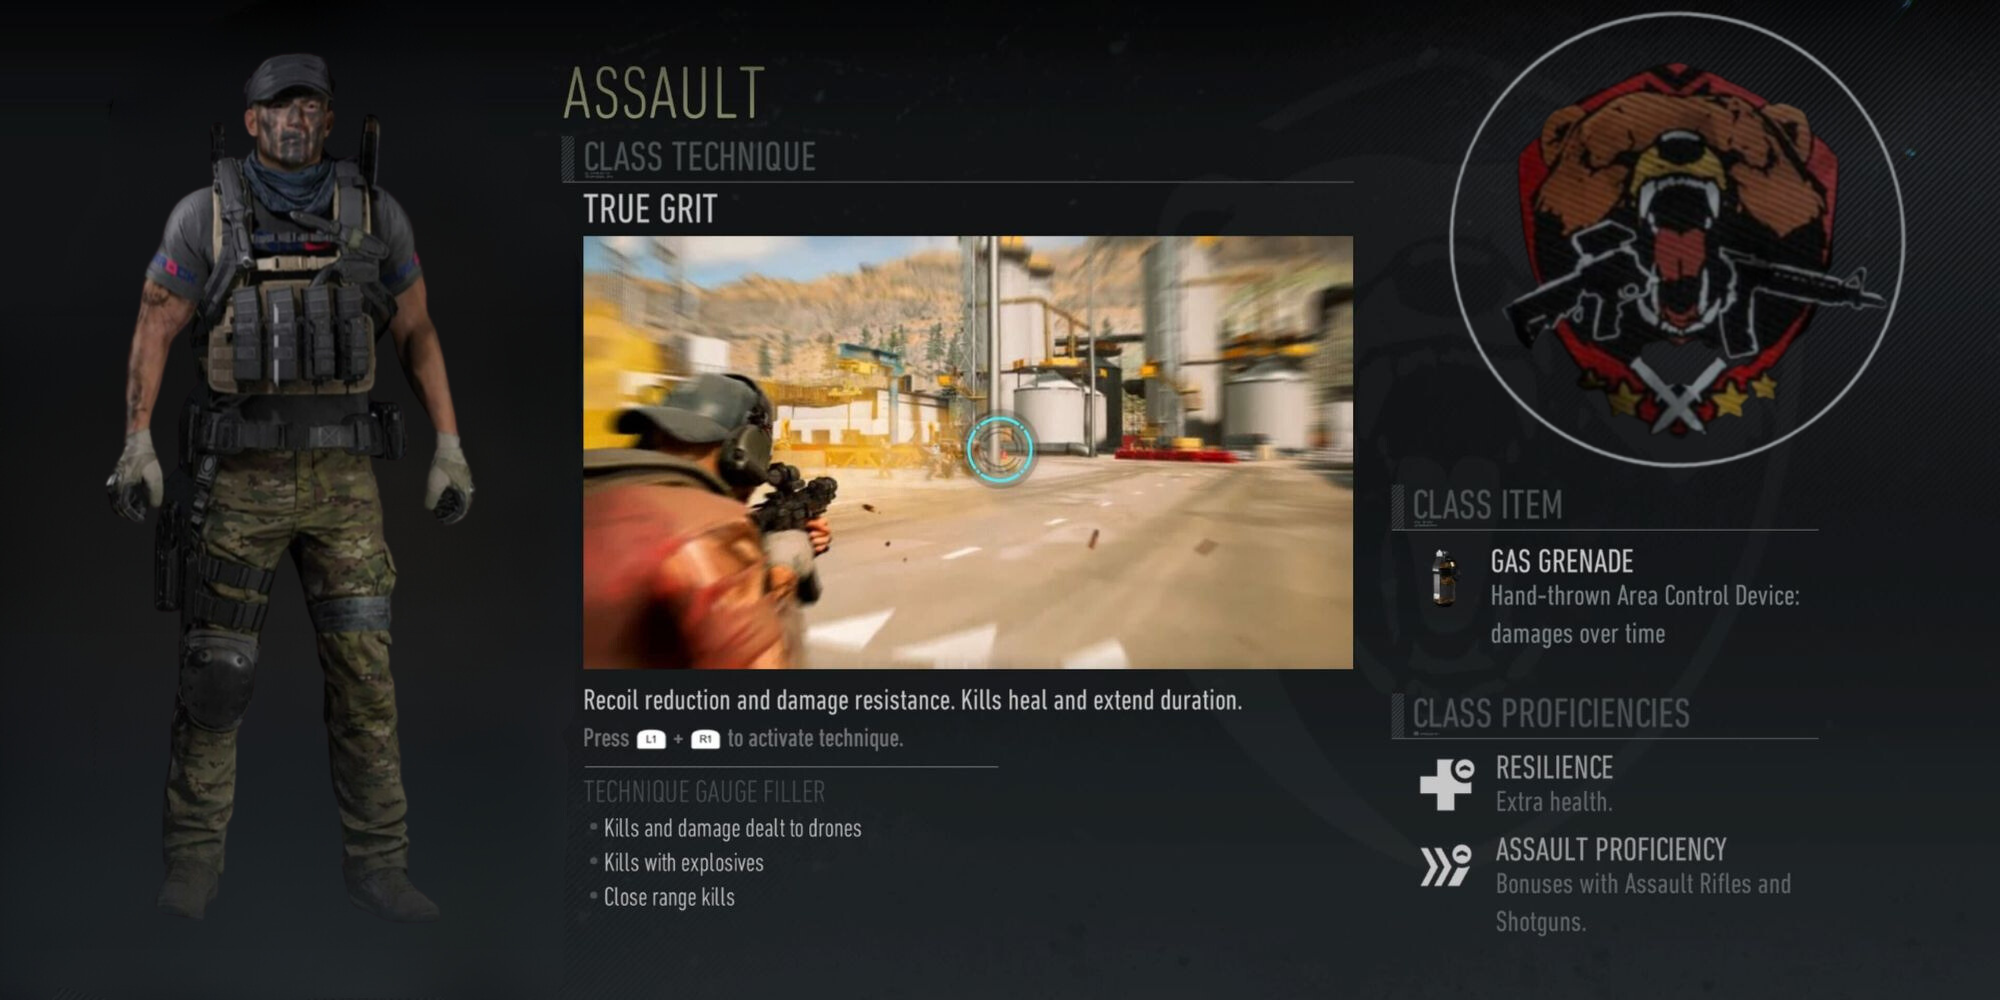 The details of the Assault Class in Ghost Recon Breakpoint, next to a soldier